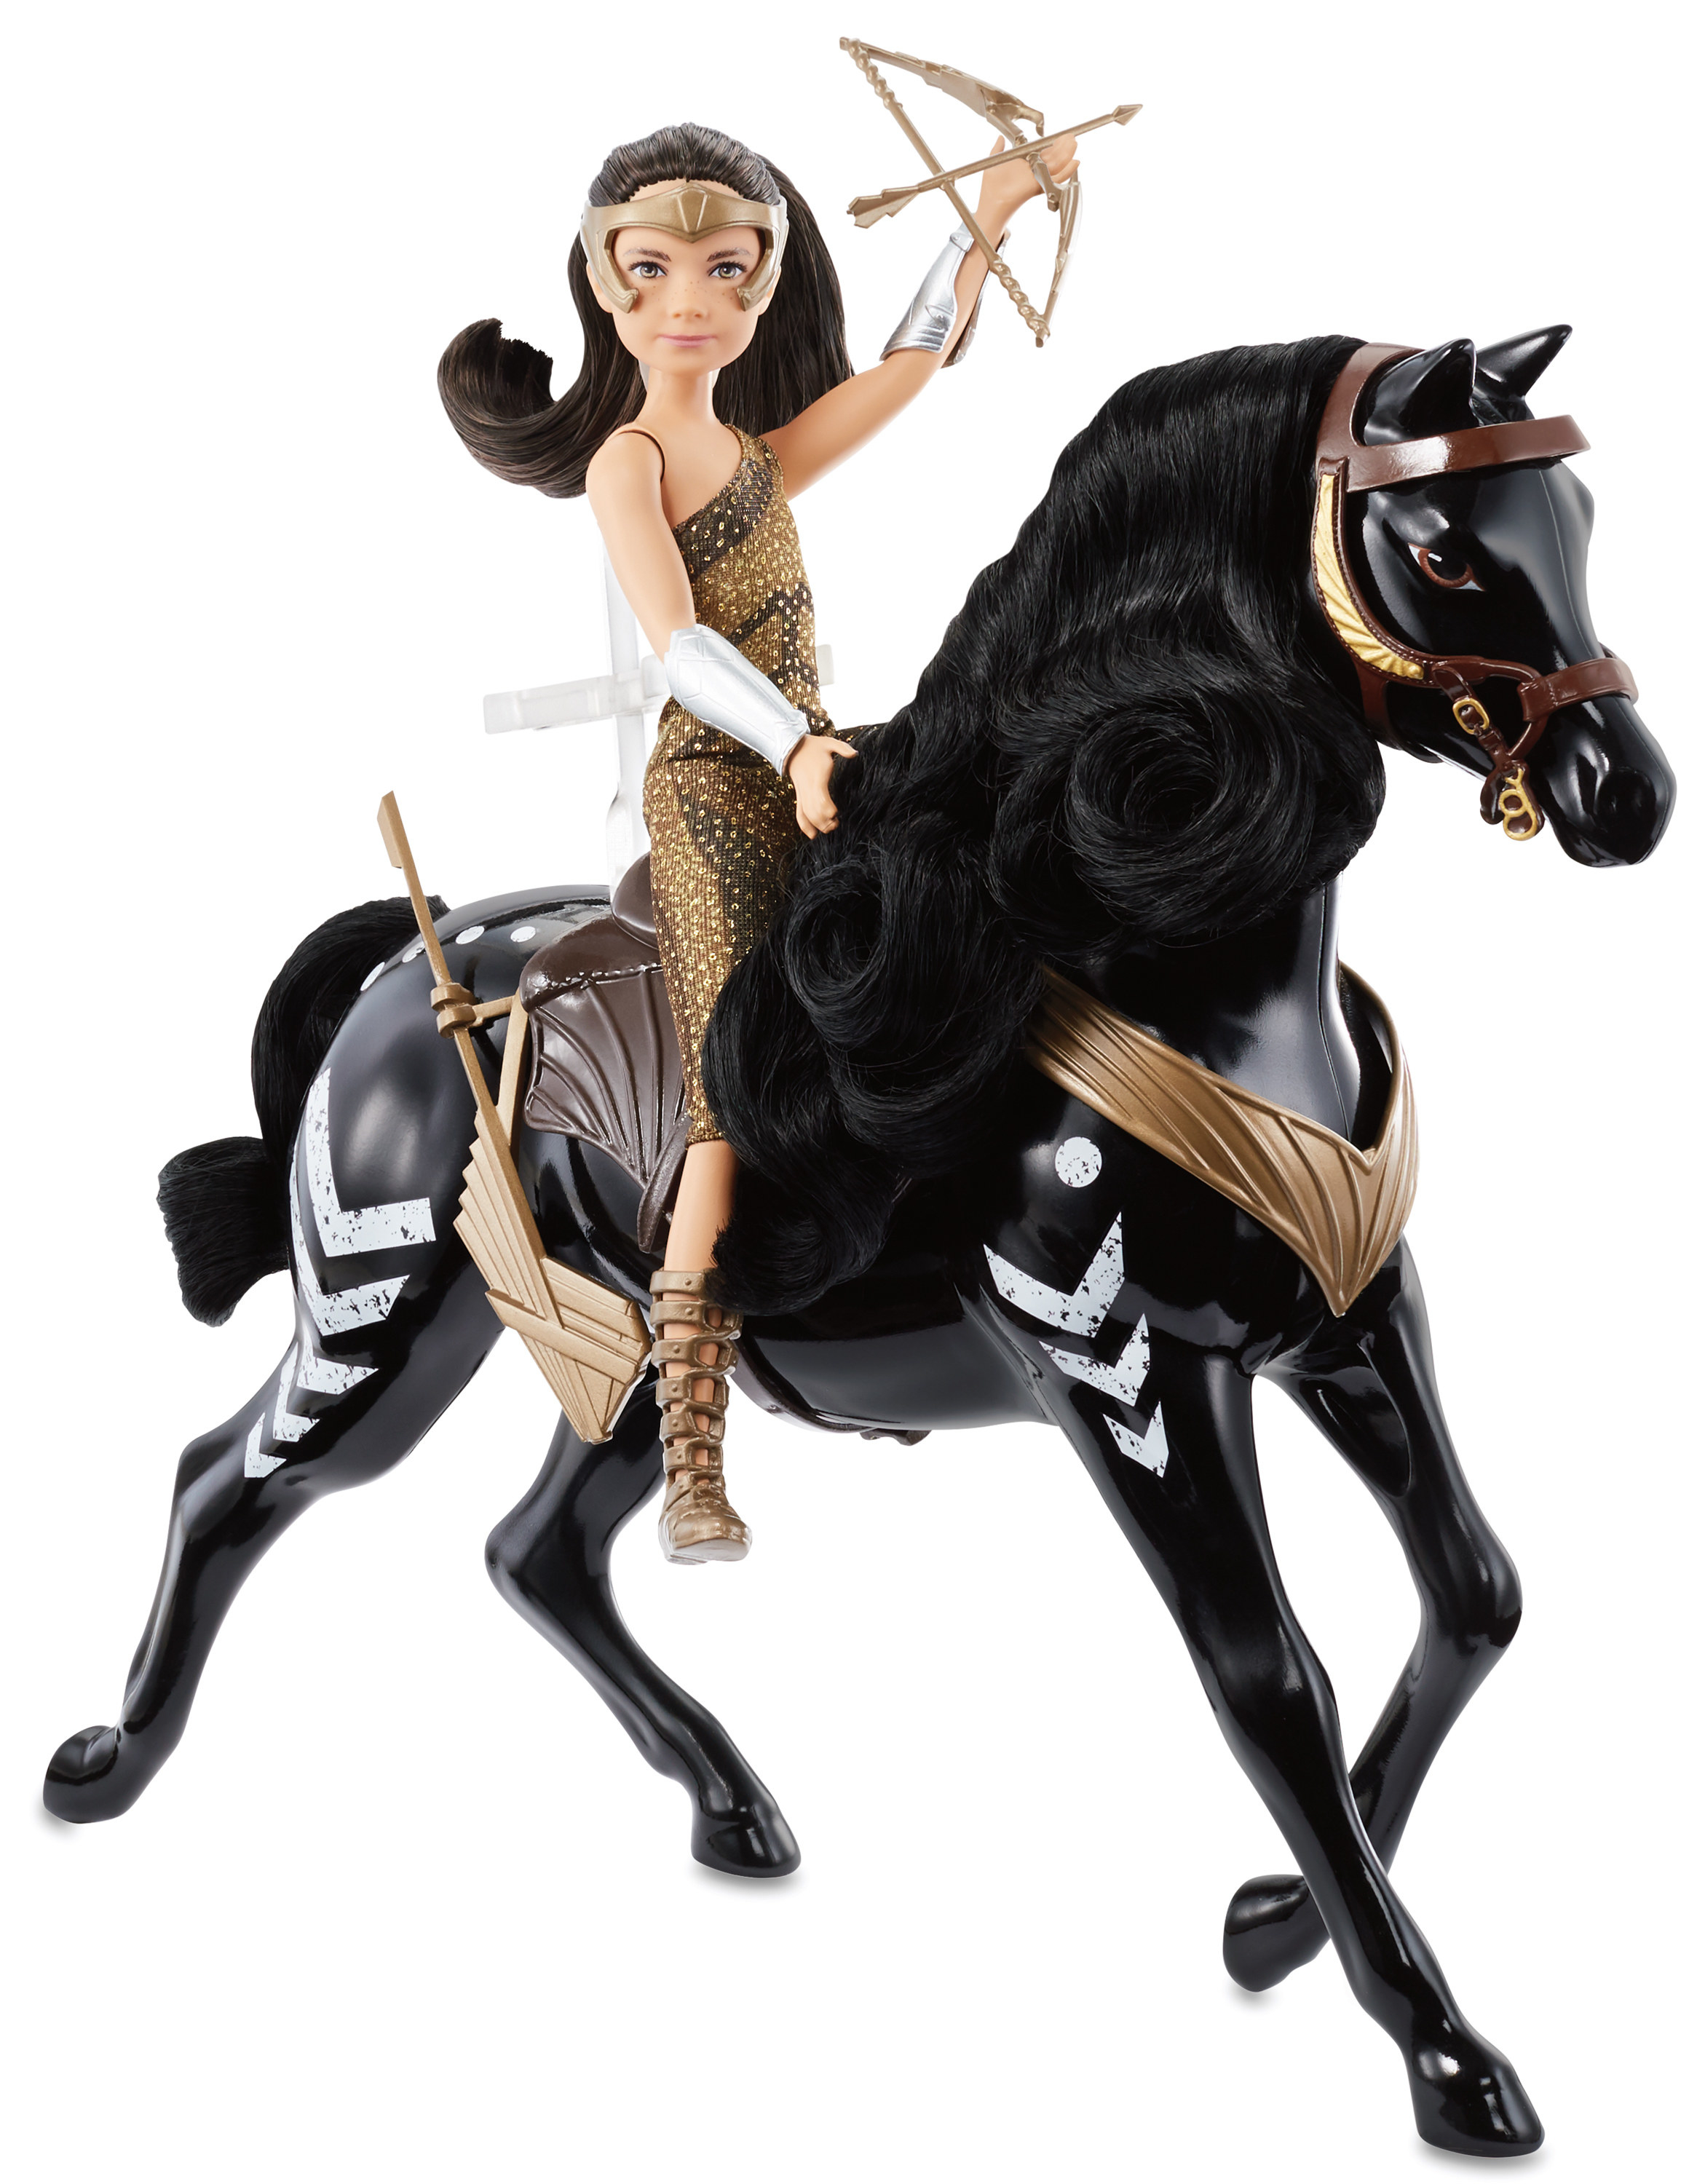 The doll, which has bendable arms and legs, clipped into the saddle to &quot;ride&quot; the horse